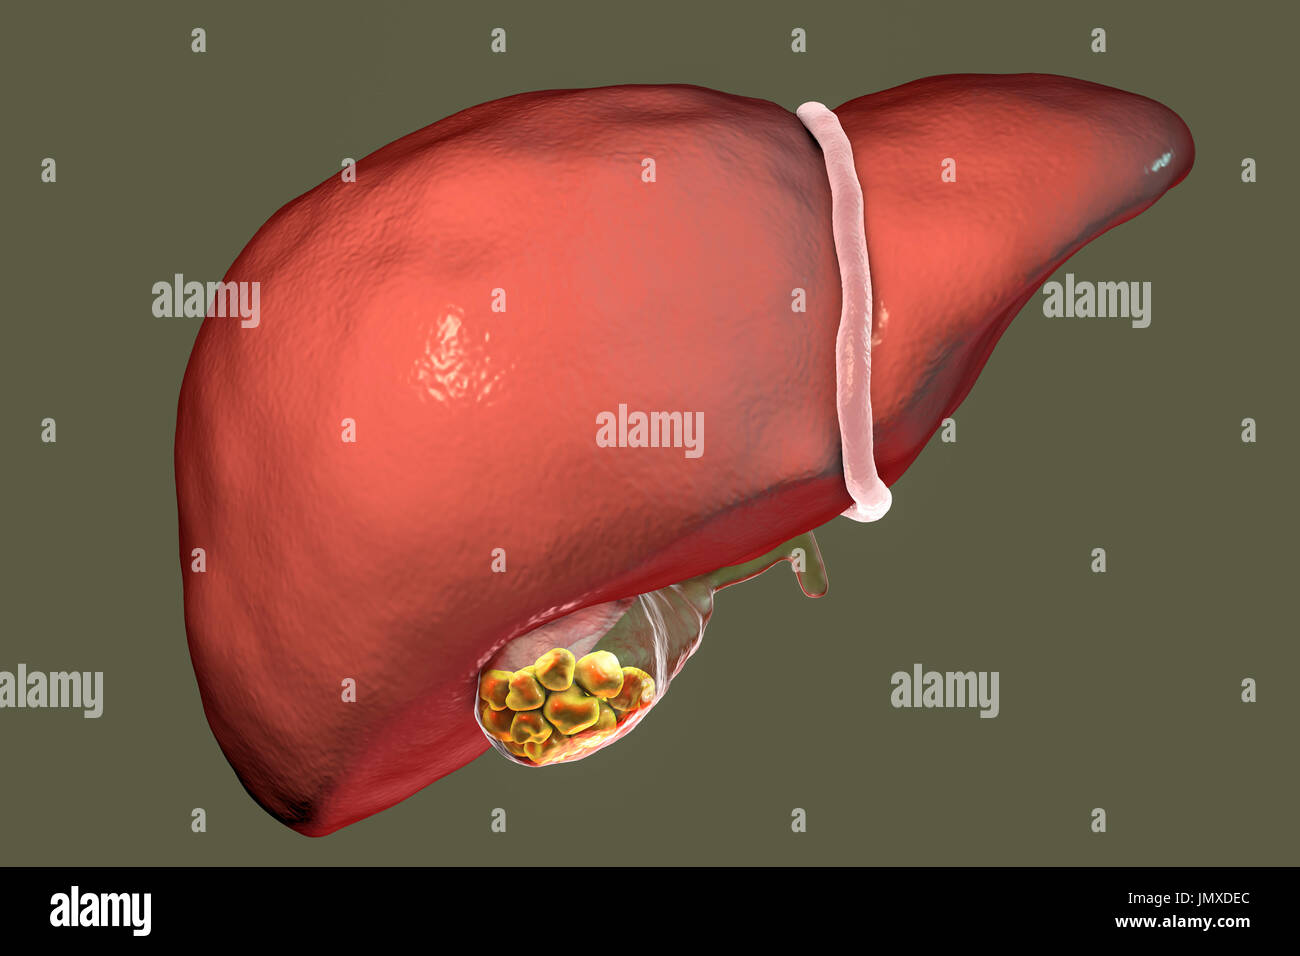 Gallstones. Illustration showing the liver and gallbladder with gallstones. The gallbladder stores bile, the digestive fluid that is produced by the liver (above gallbladder) and passed to the small intestine. Gallstones, hard deposits formed of cholesterol and bile salts, form in the gallbladder when there is an imbalance in the chemical composition of the bile. Gallstones are usually symptomless, unless one obstructs the bile duct, causing acute pain, jaundice and infection. Treatment is with drugs to dissolve the stones or surgical removal of the gallbladder. Stock Photo